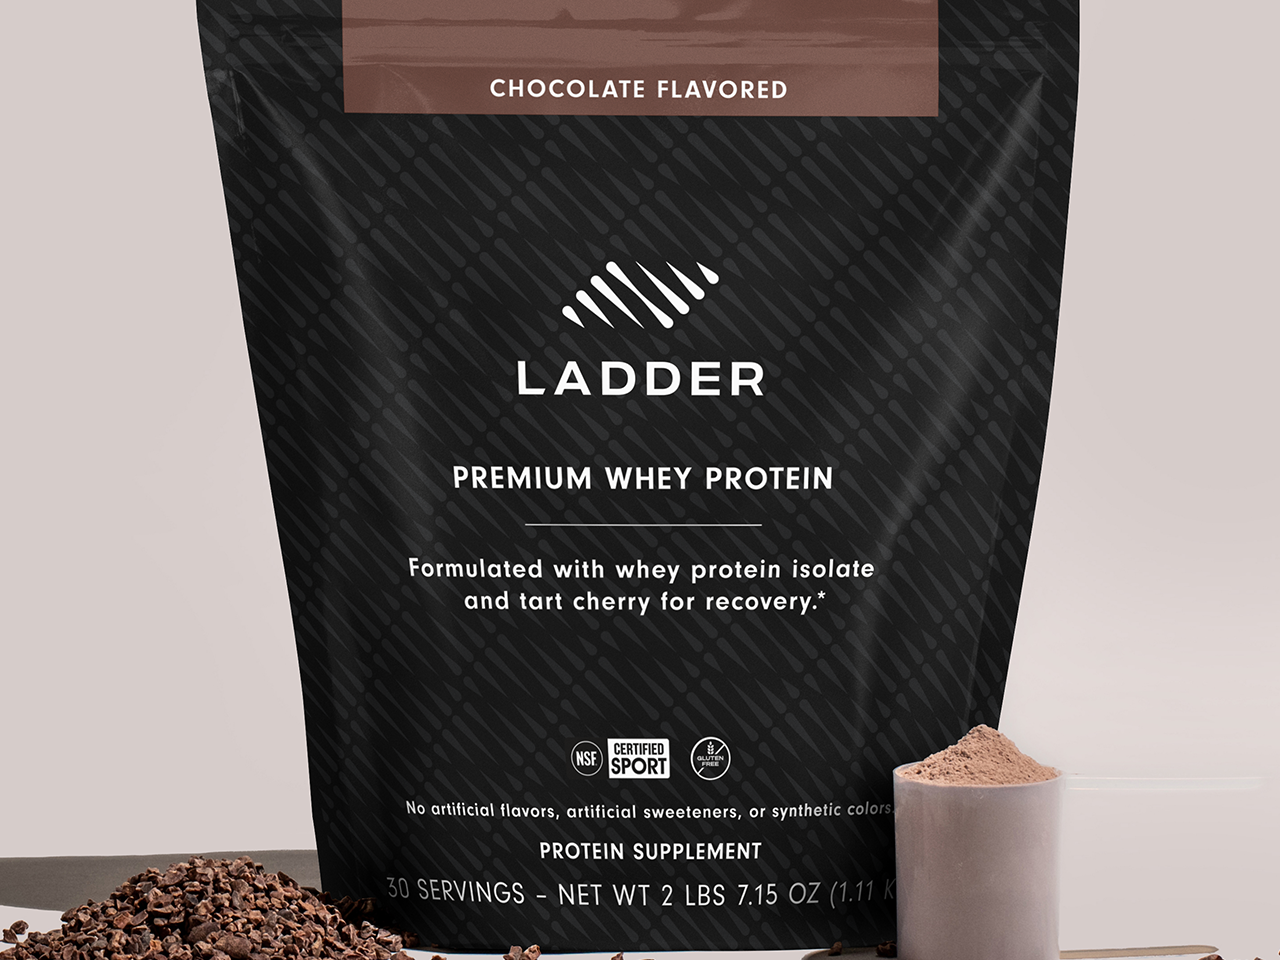 https://food.fnr.sndimg.com/content/dam/images/food/products/2022/1/22/rx_ladder-whey-protein.png.rend.hgtvcom.1280.960.suffix/1642885930430.png